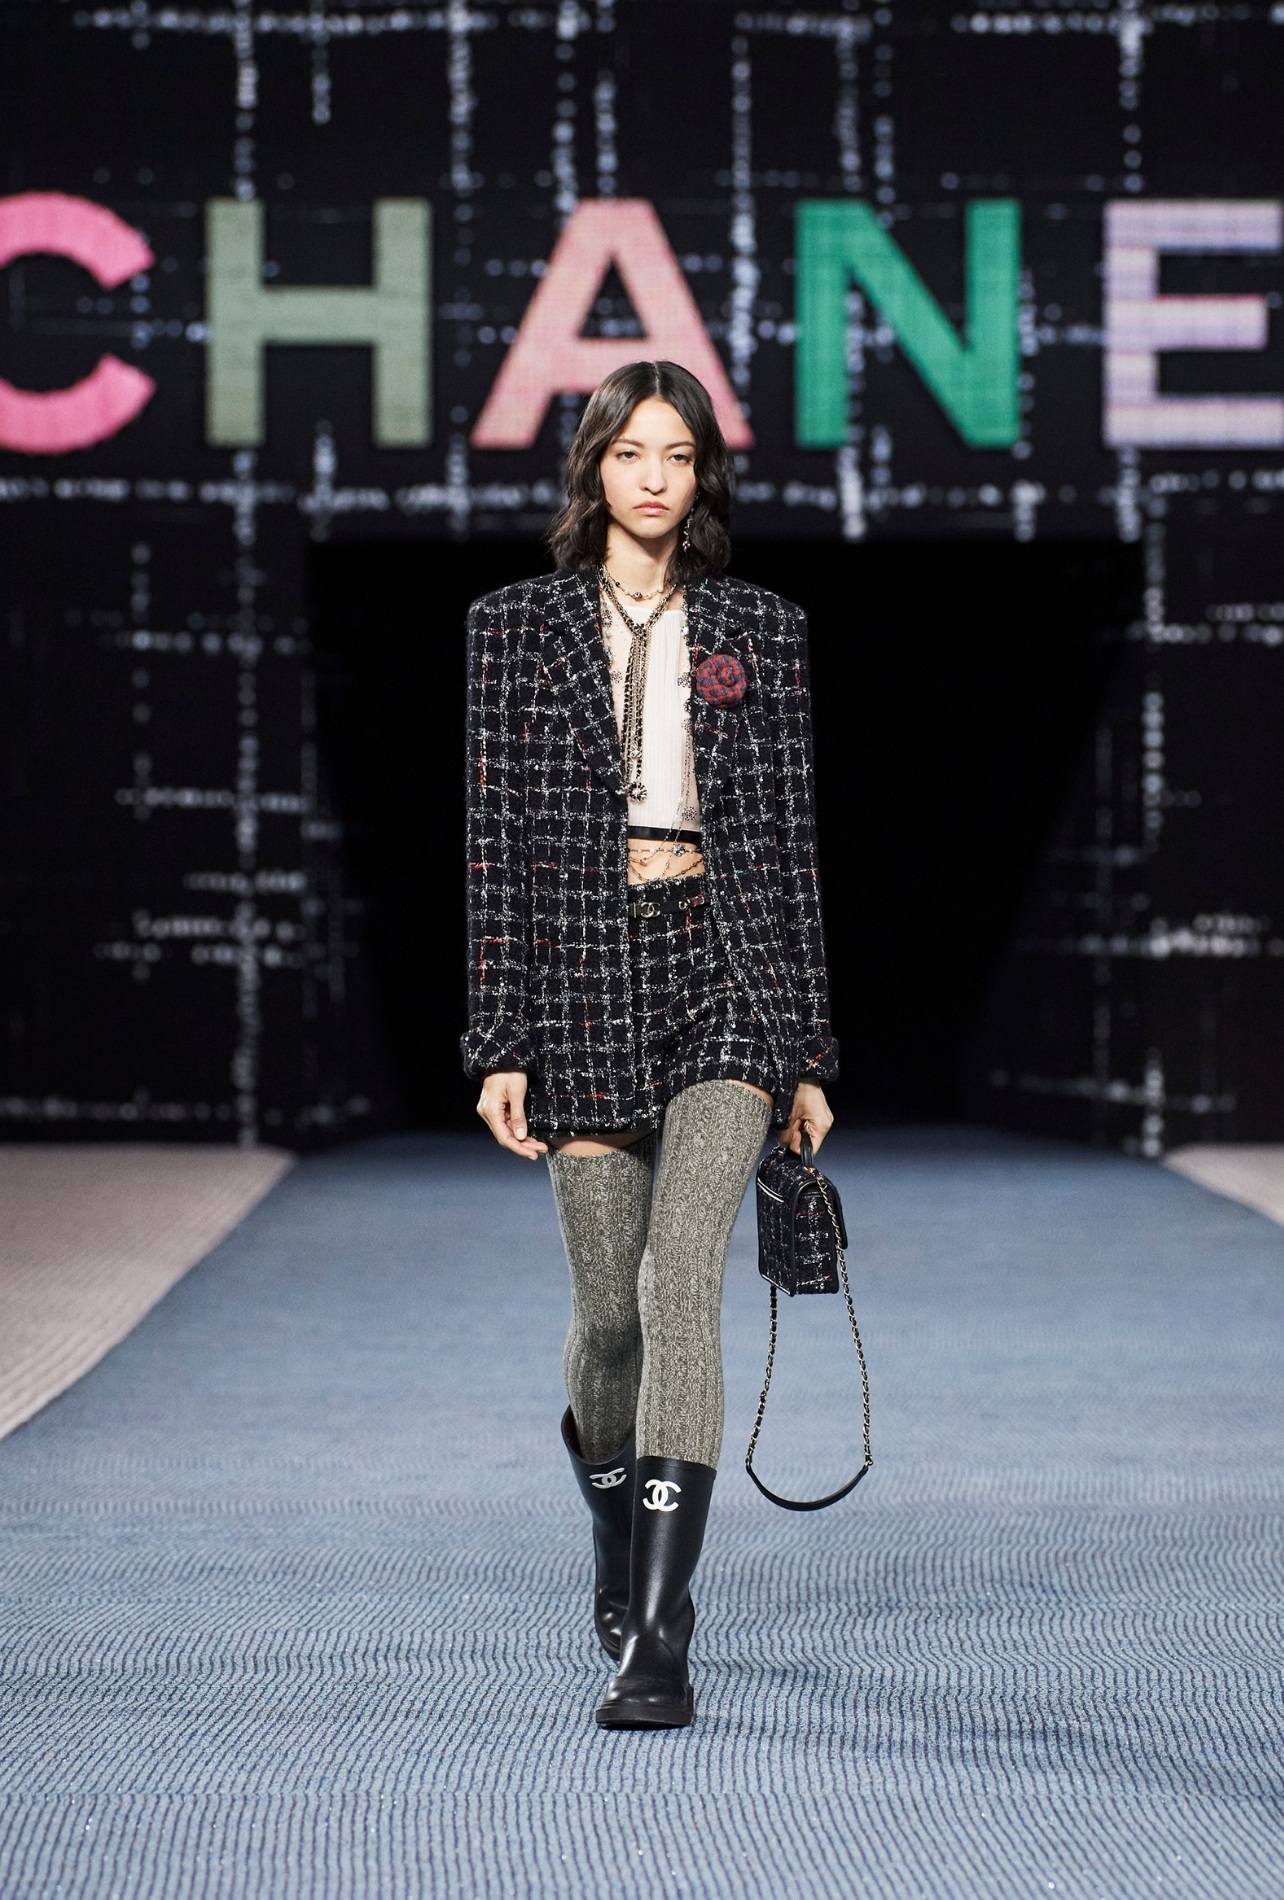 Model in Chanel fashion show wearing rubber boots with interlocking C logo in white